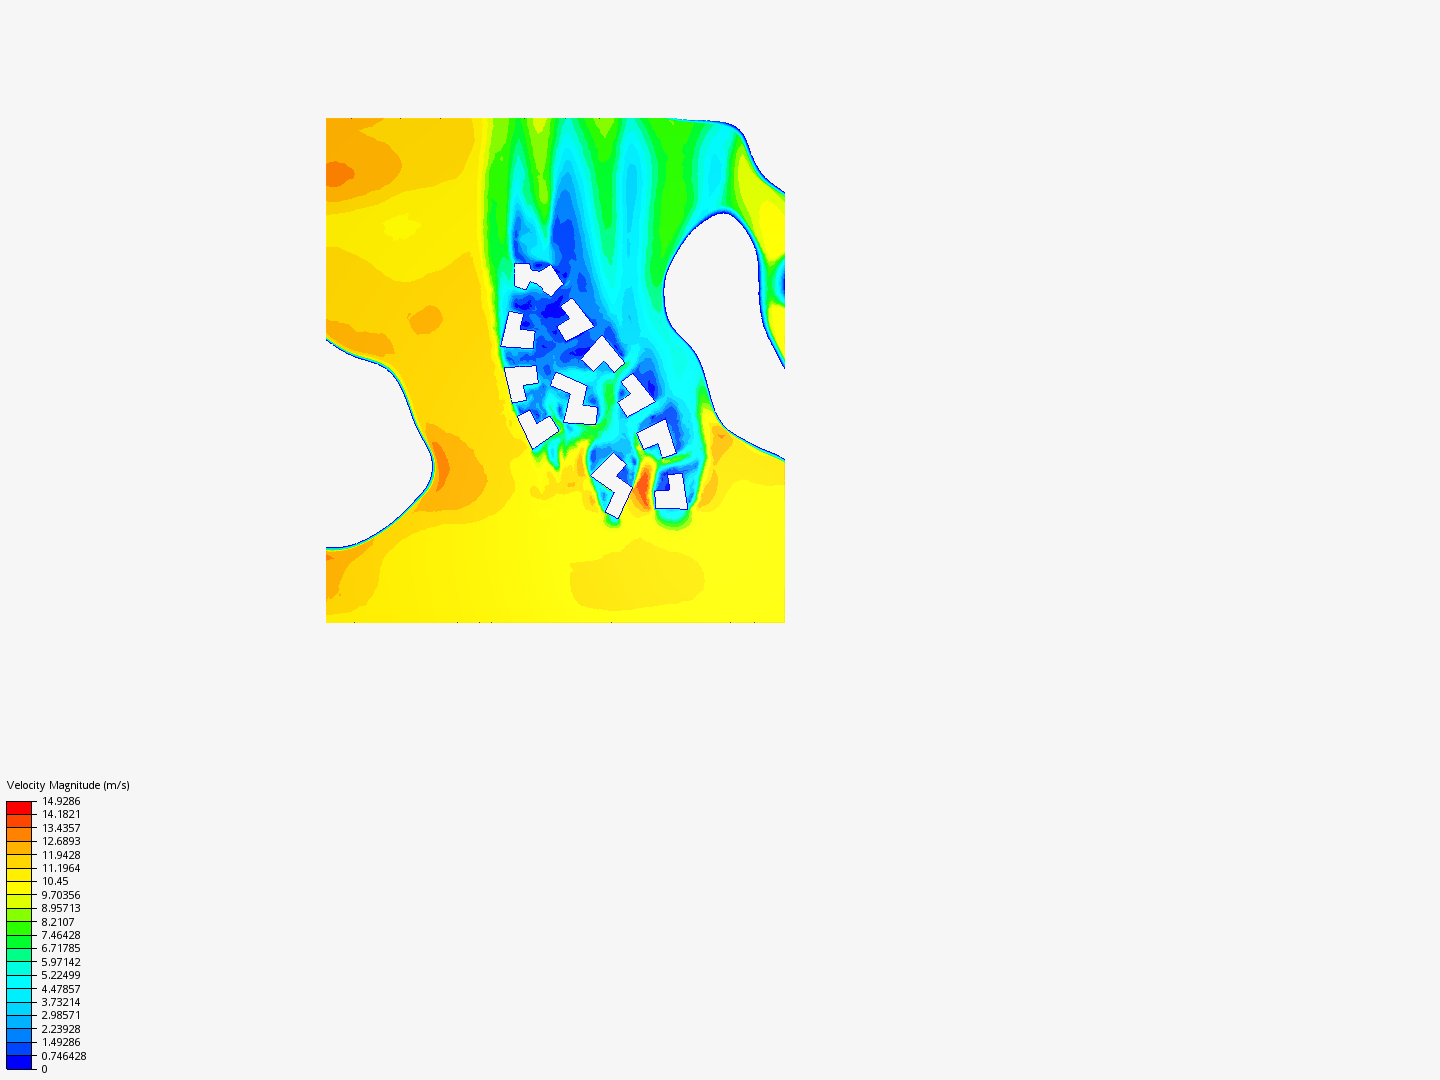 3d Topography buildings 2 image